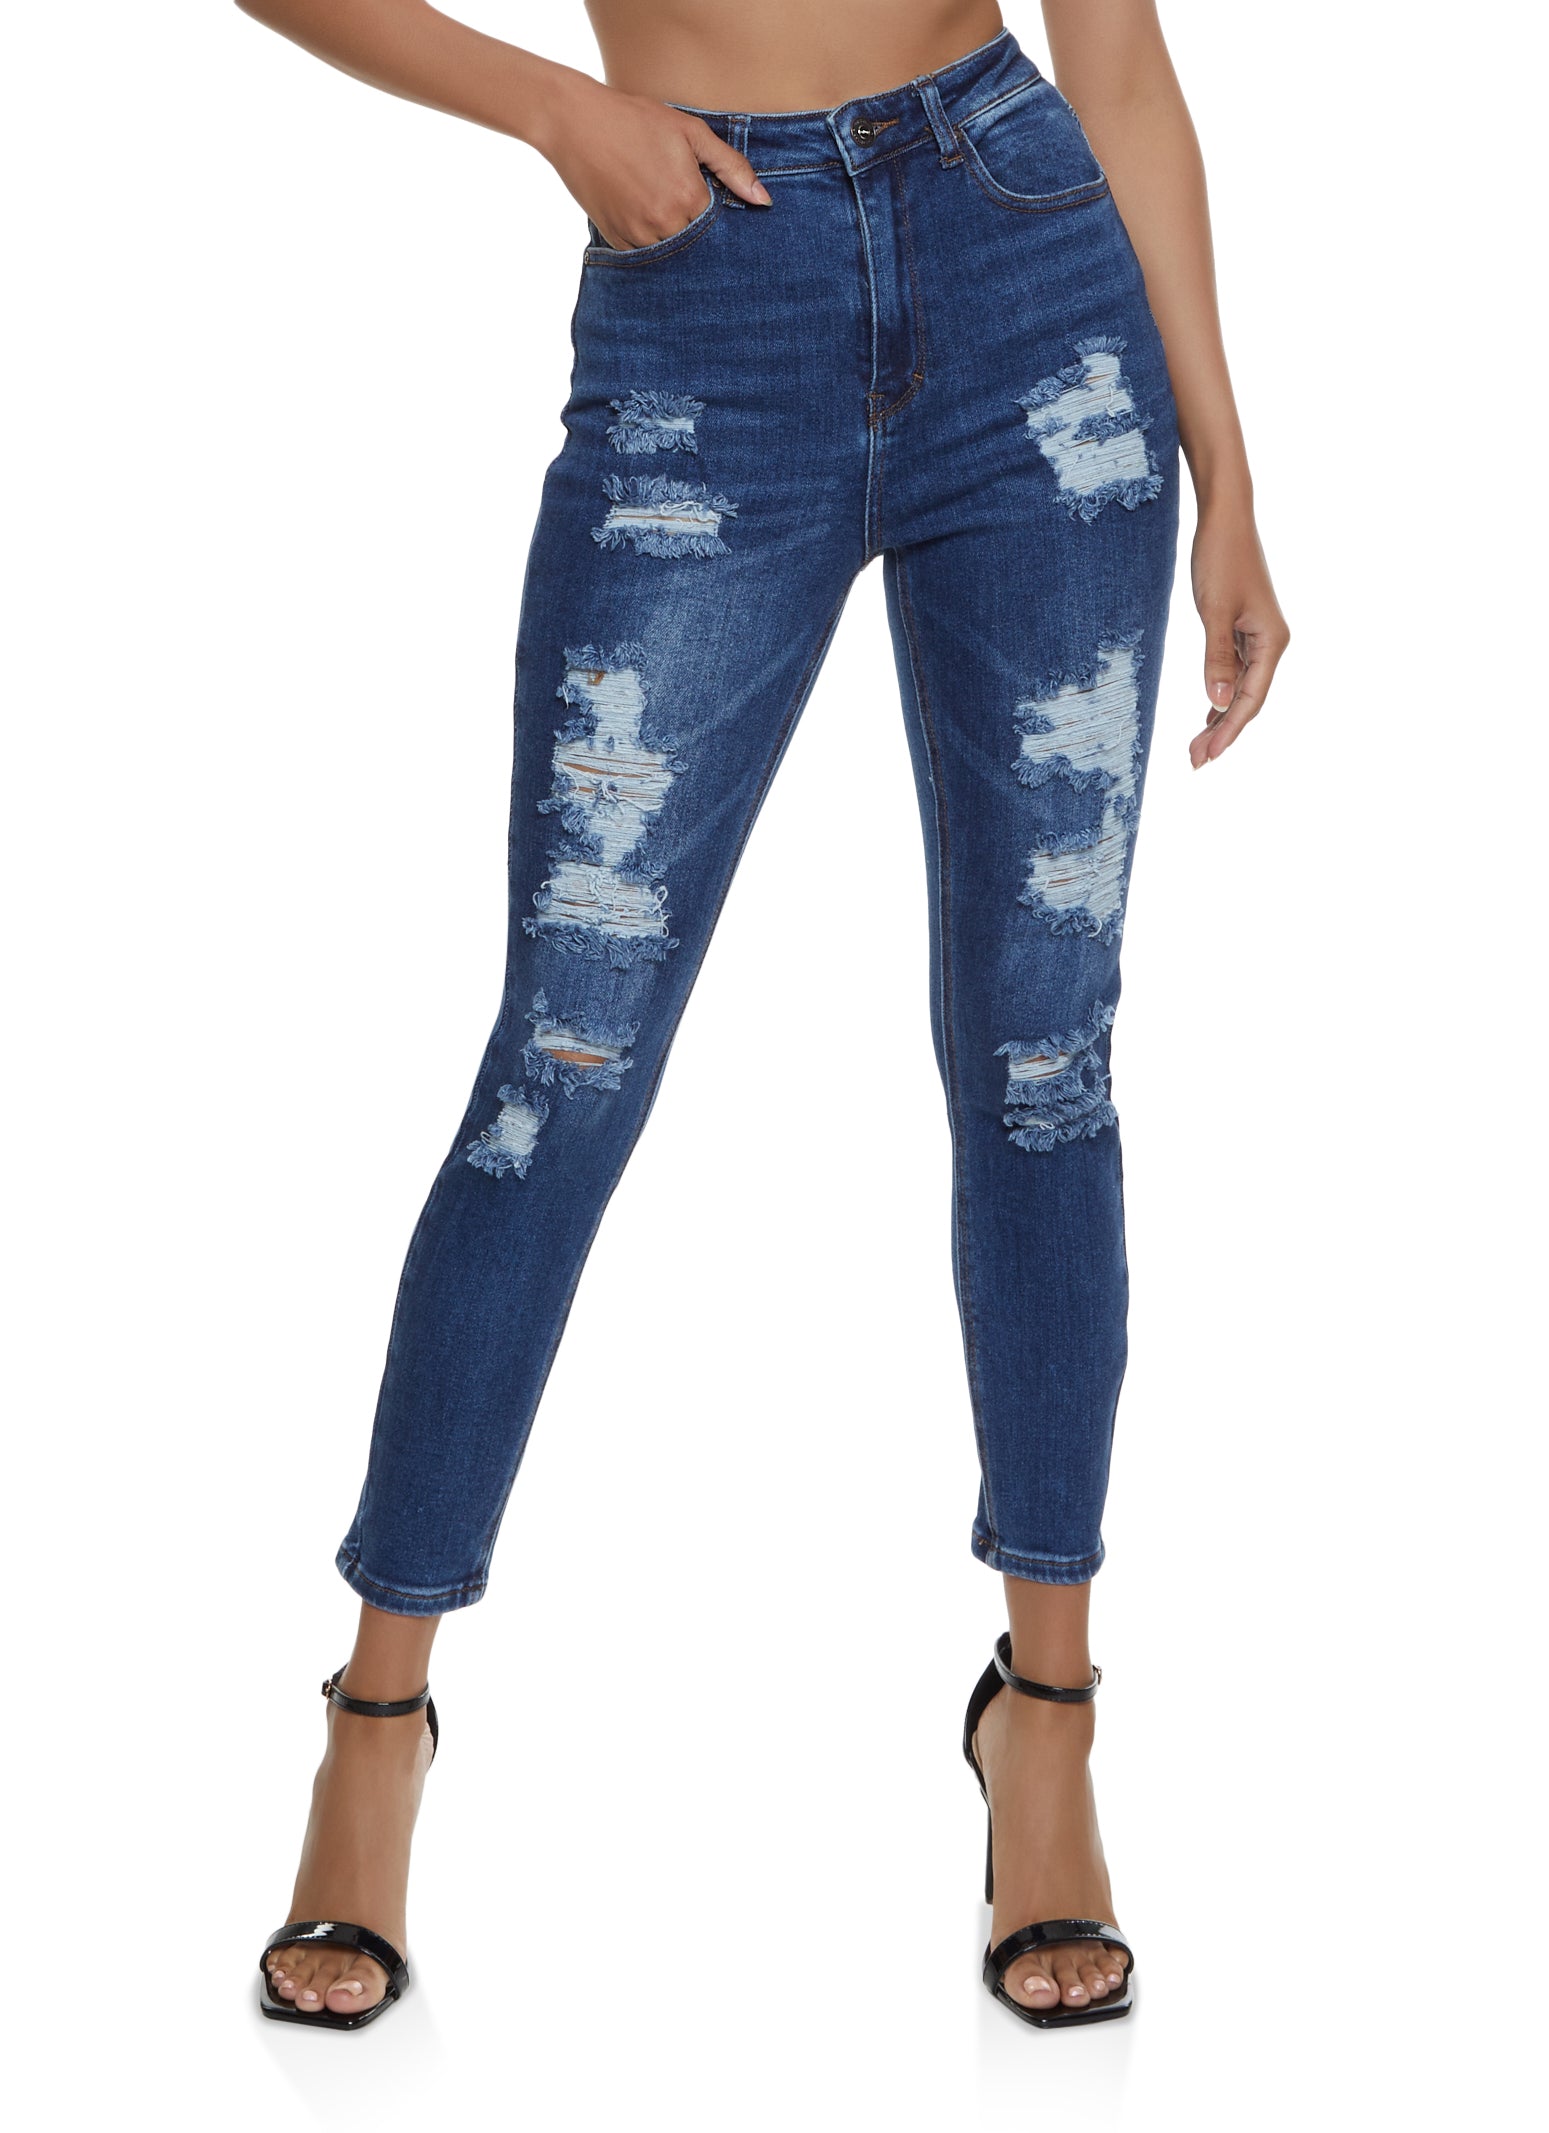 WAX Distressed Frayed Jeans